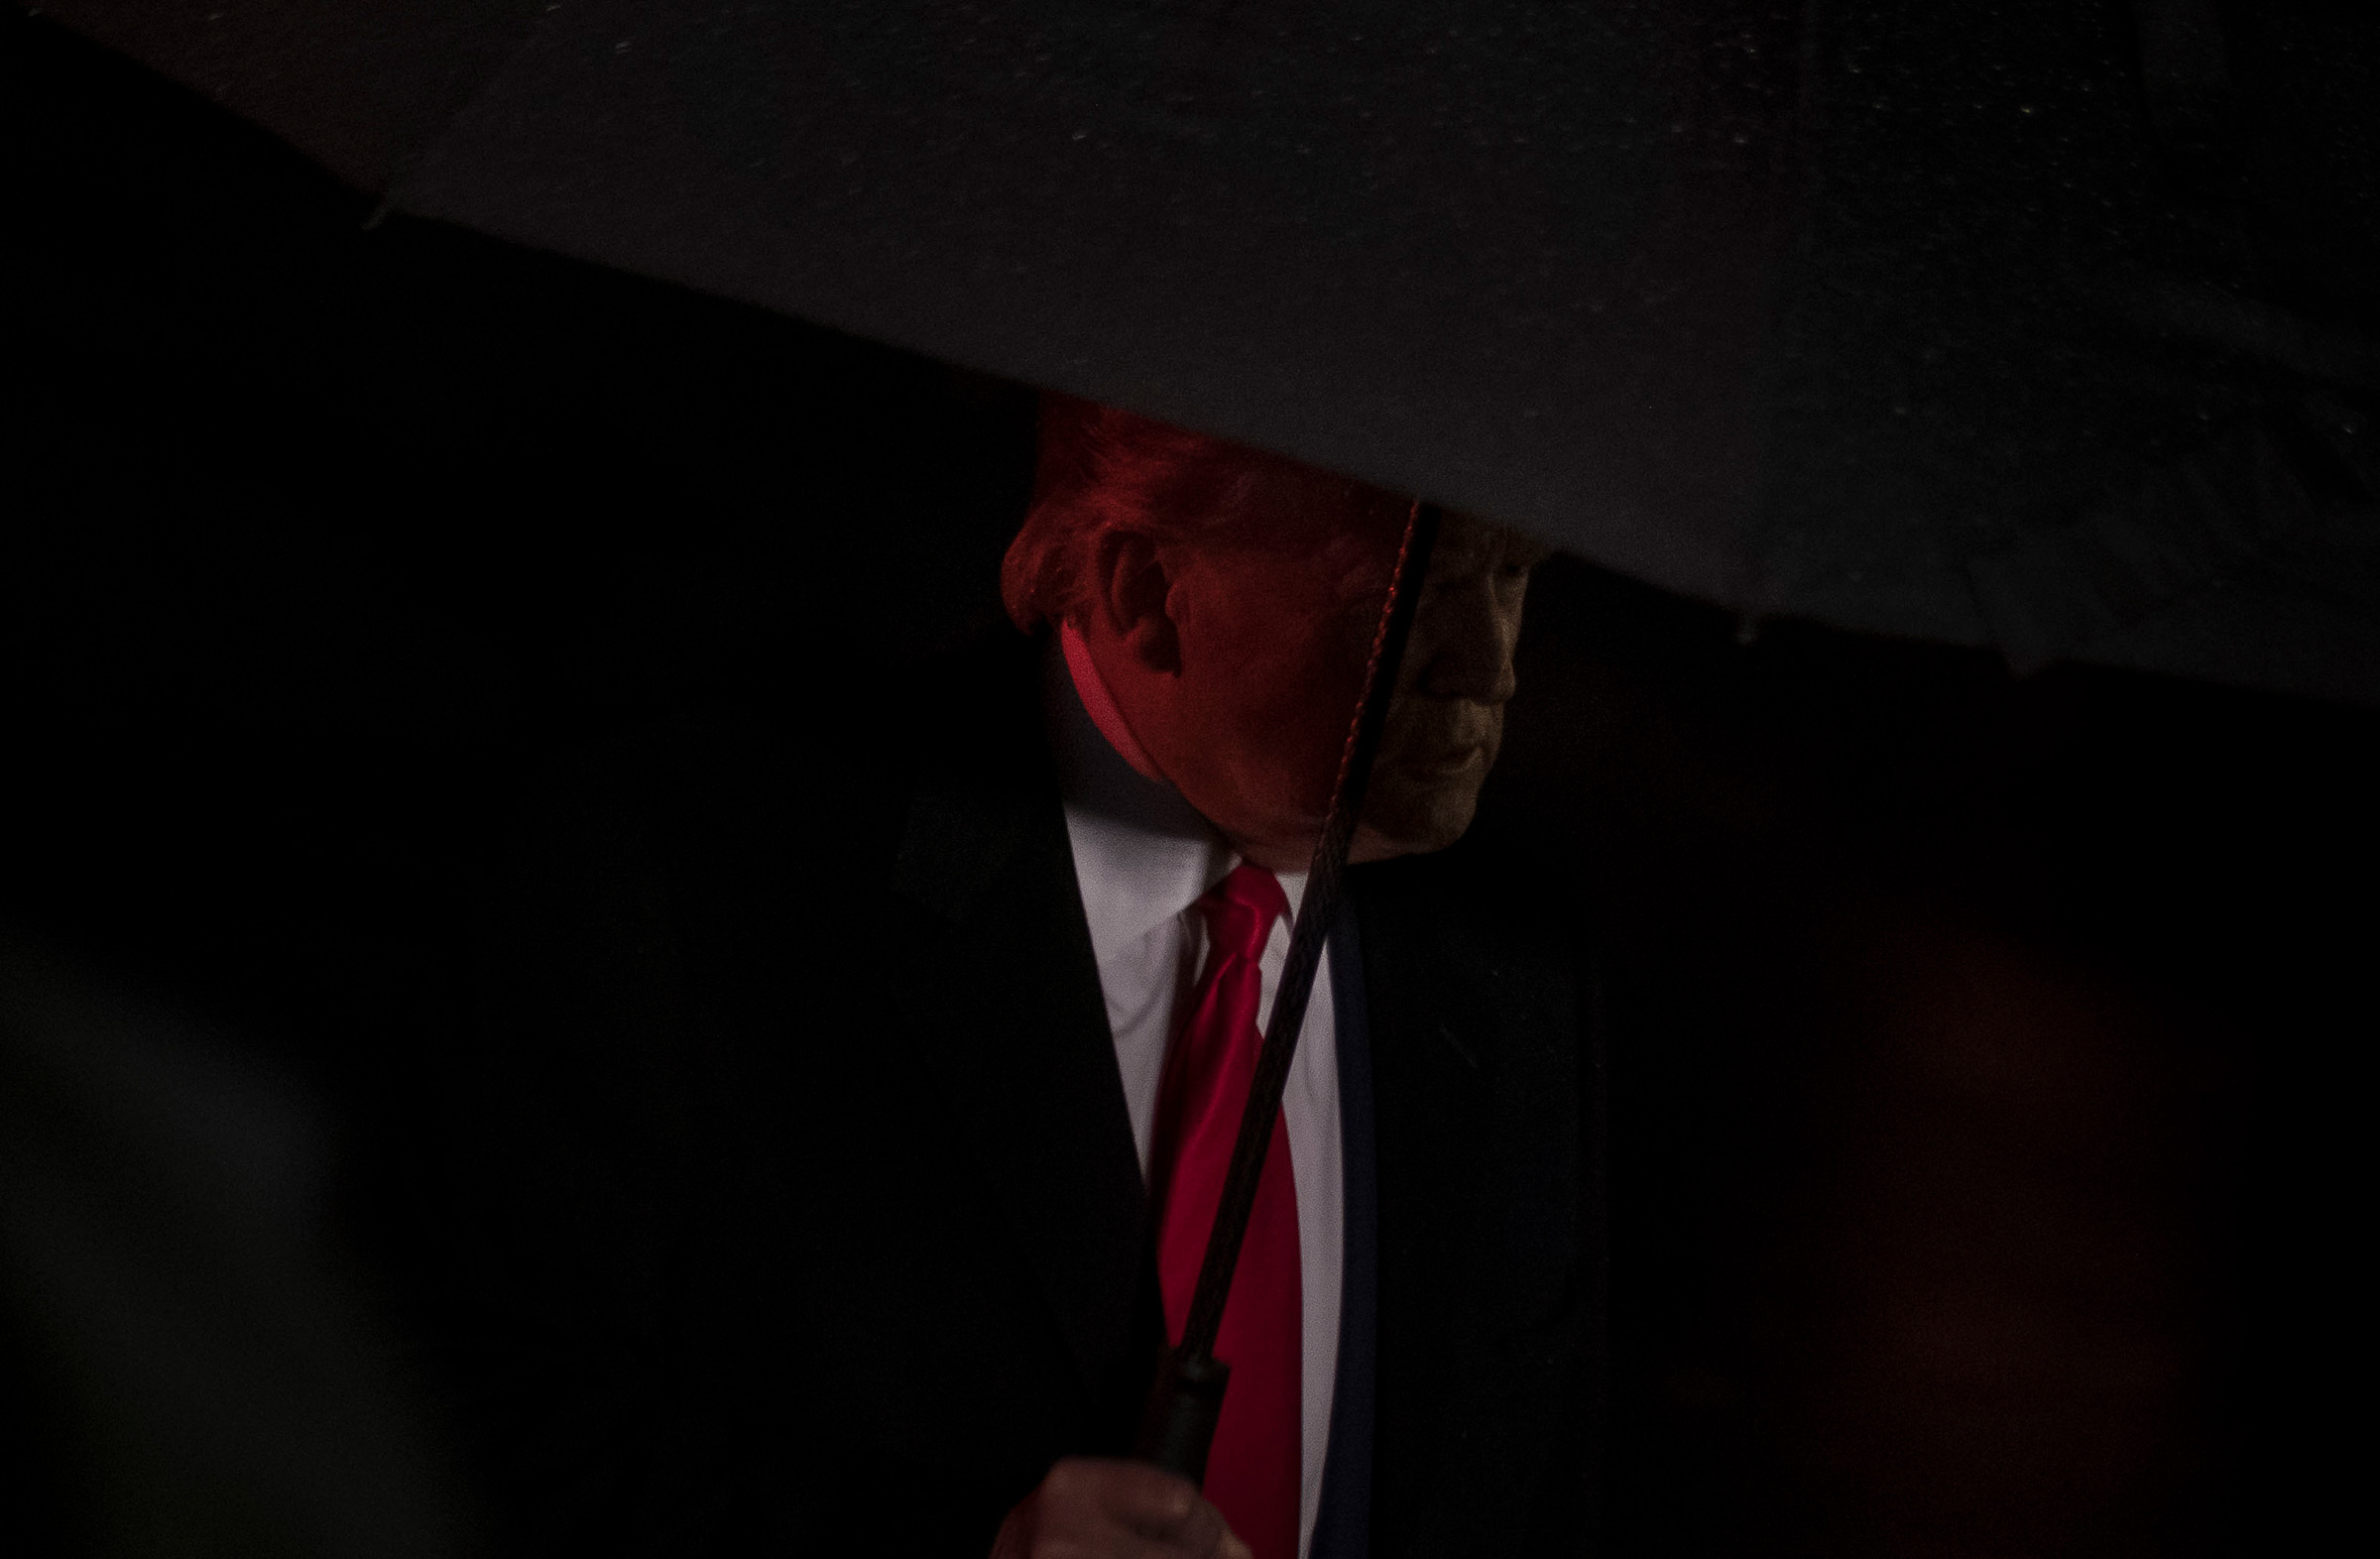 President Donald Trump speaks with reporters before boarding Marine One at the White House in Washington, D.C., Dec. 10, 2019. (Gabriella Demczuk for TIME)